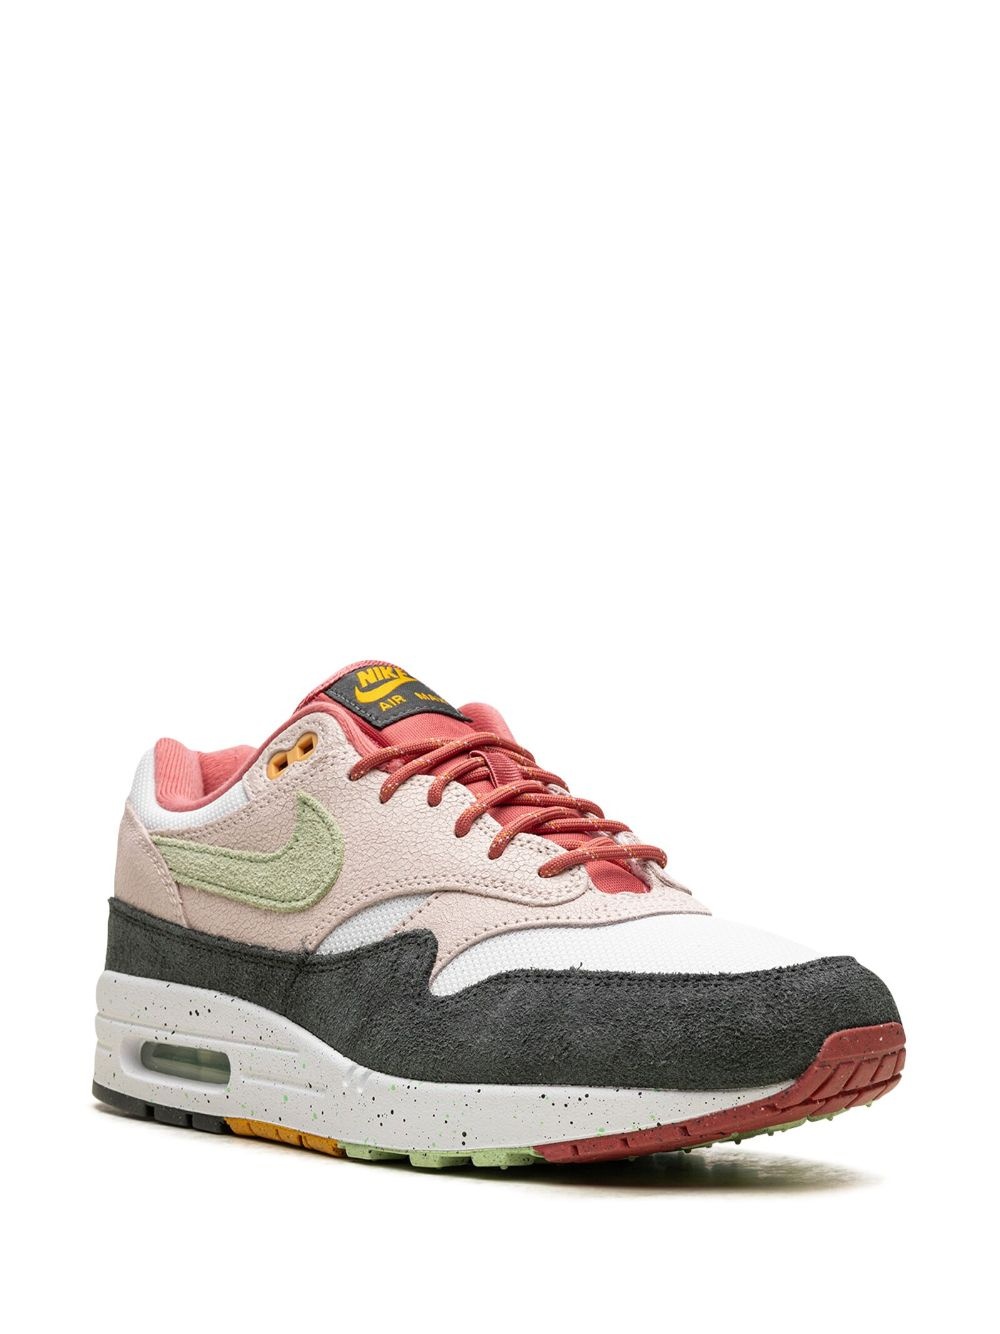 Air Max 1 Easter Celebration sneakers - 2